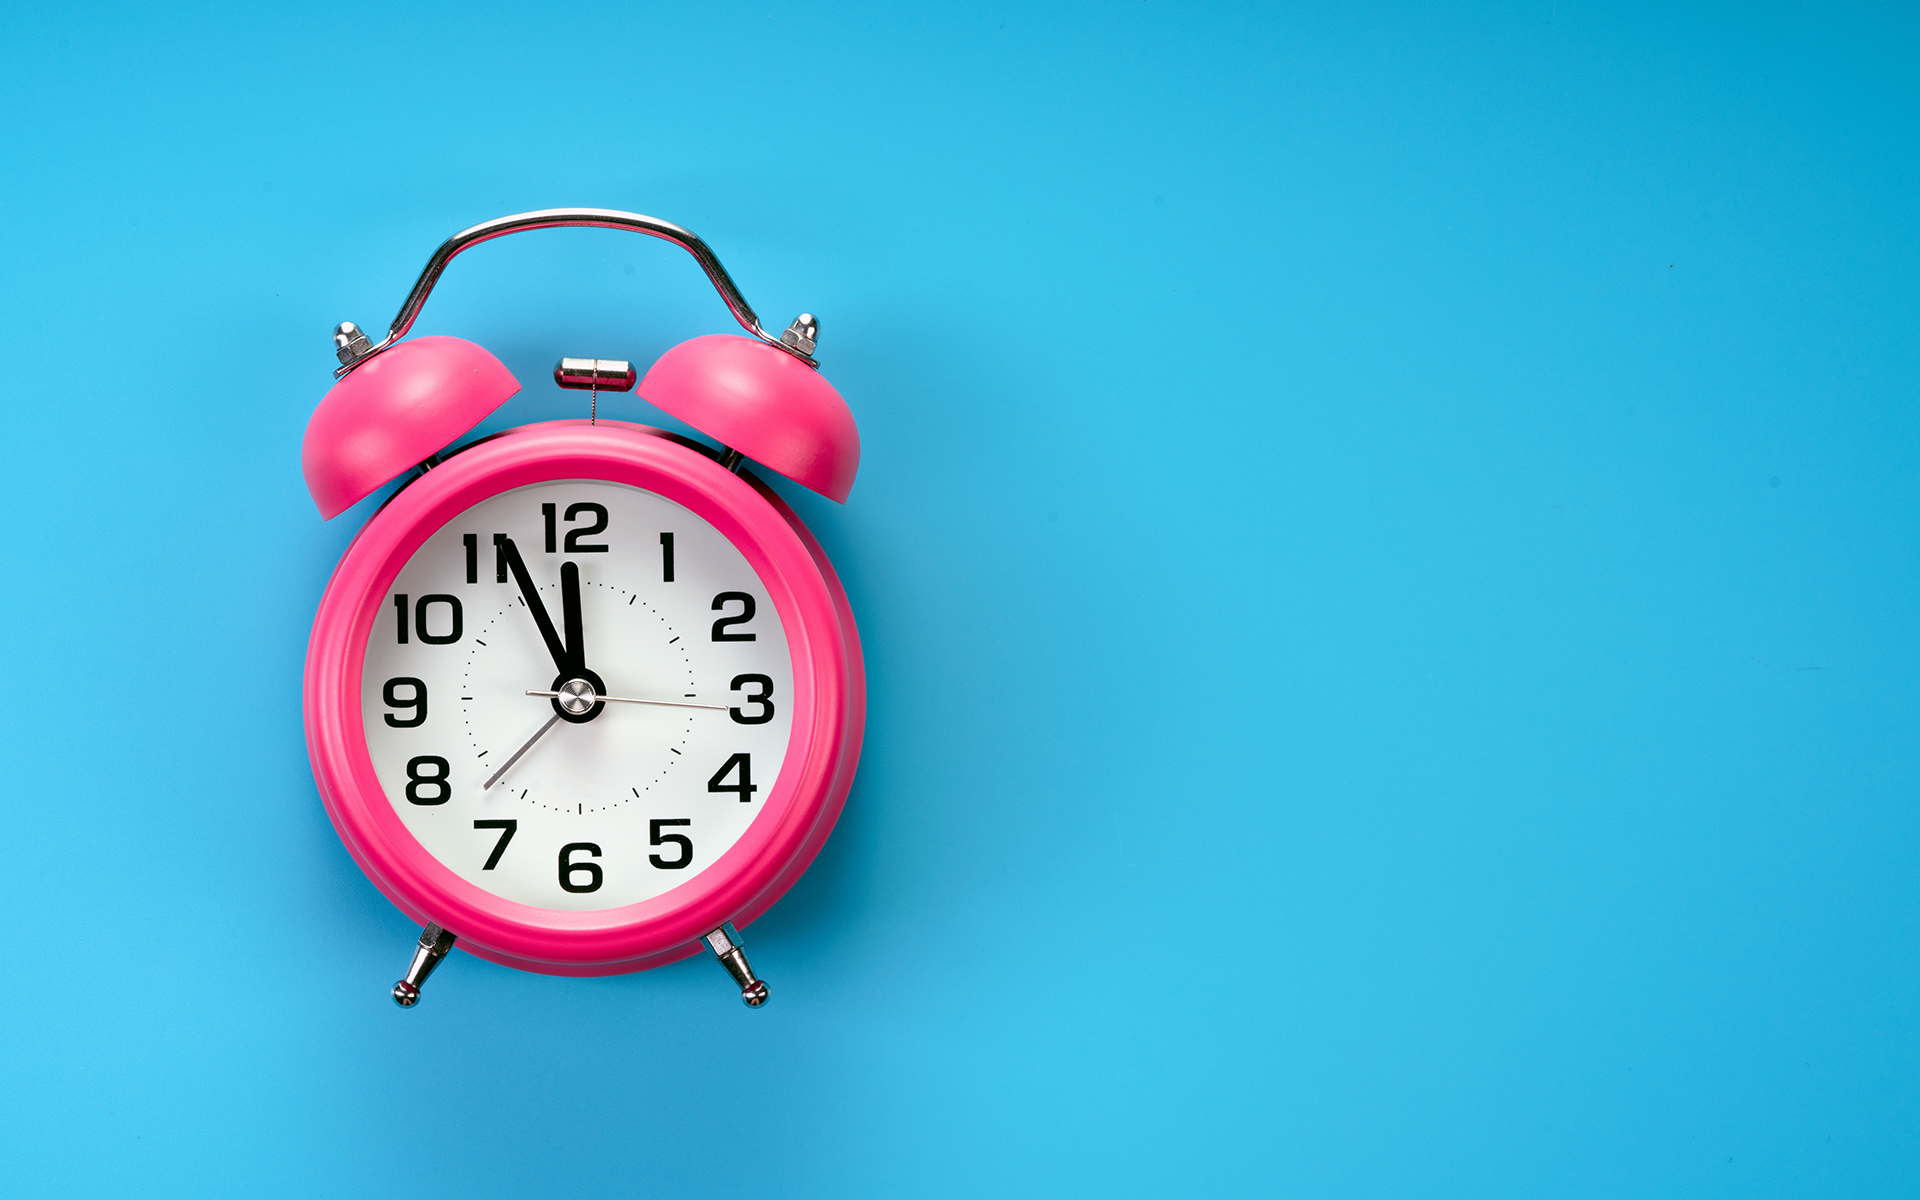 How Our Perception of Time Shifts (When We Are Present)—A pink alarm clock is over a blue background.